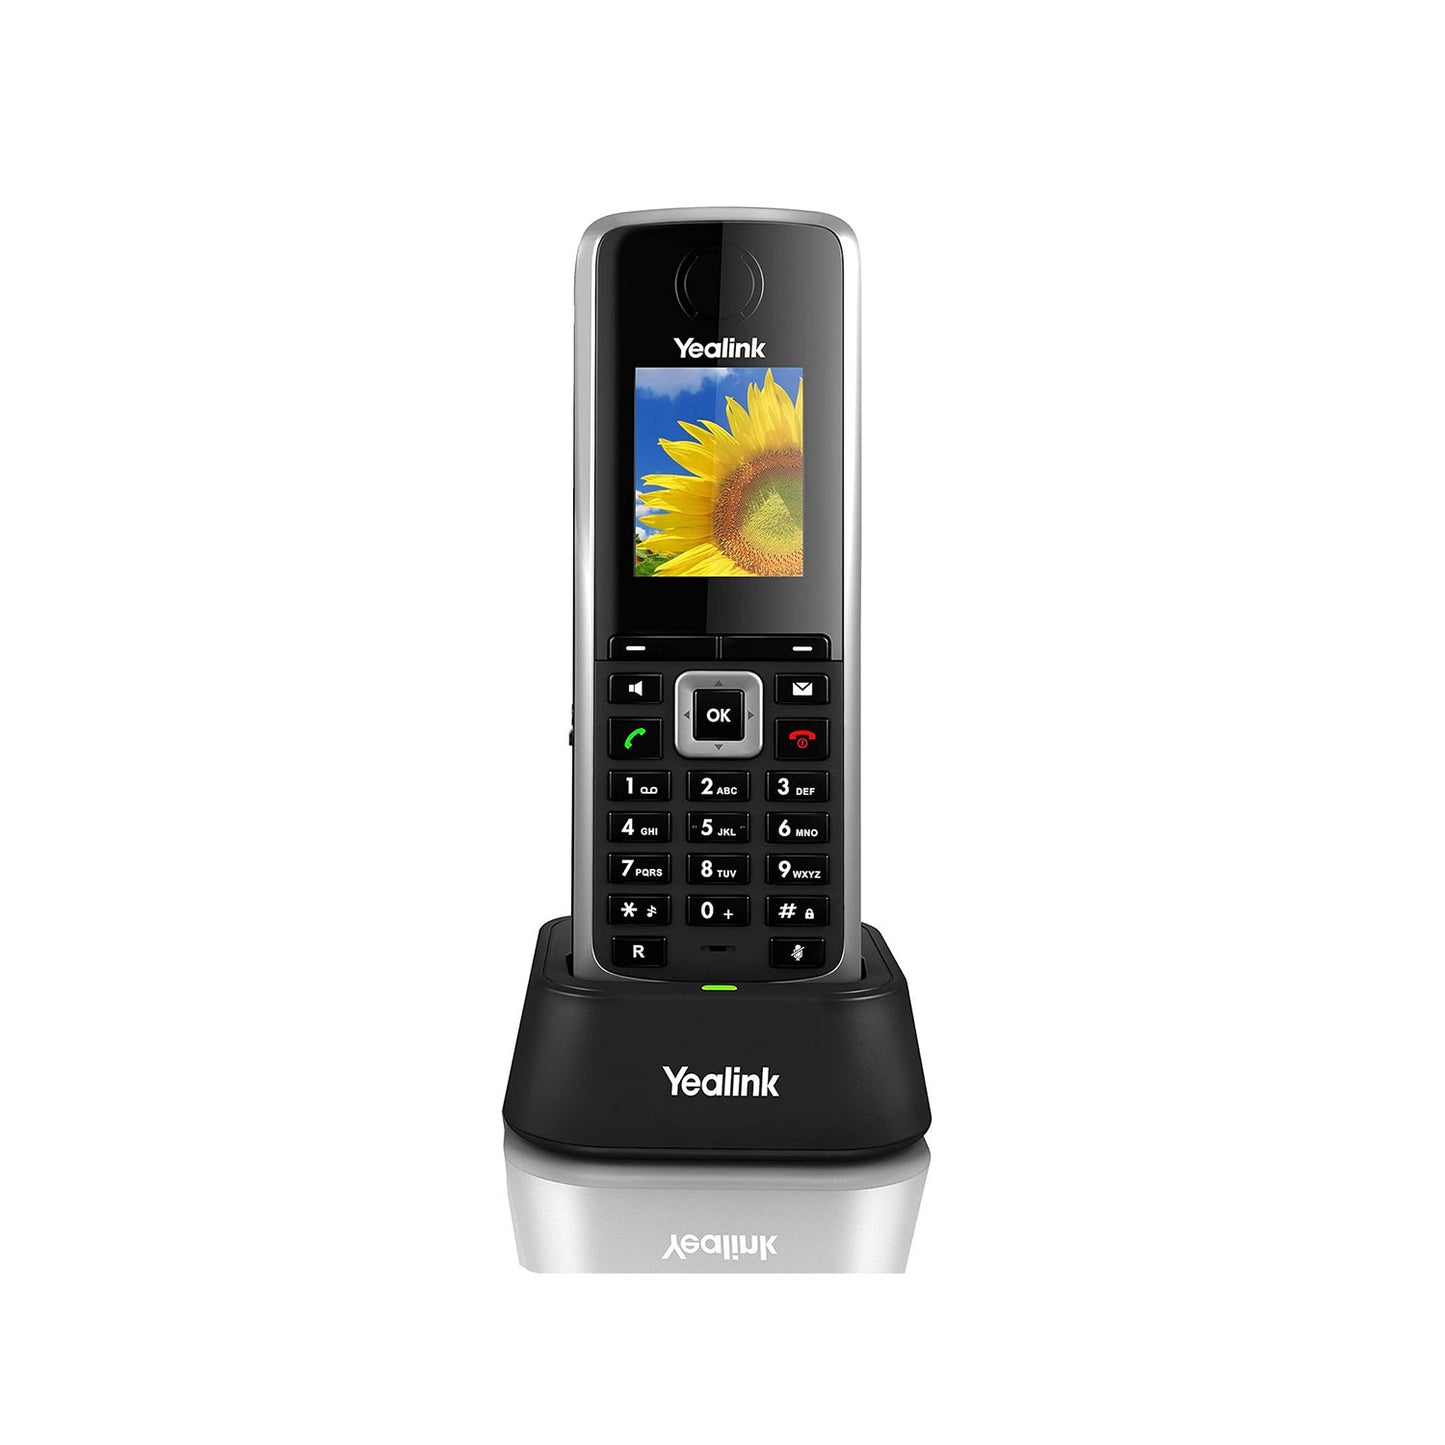 Yealink W52H Cordless DECT IP Phone, Base Station Not Included, 1.8-Inch Color Display. 10/100 Ethernet, 802.3af PoE, Power Adapter Included